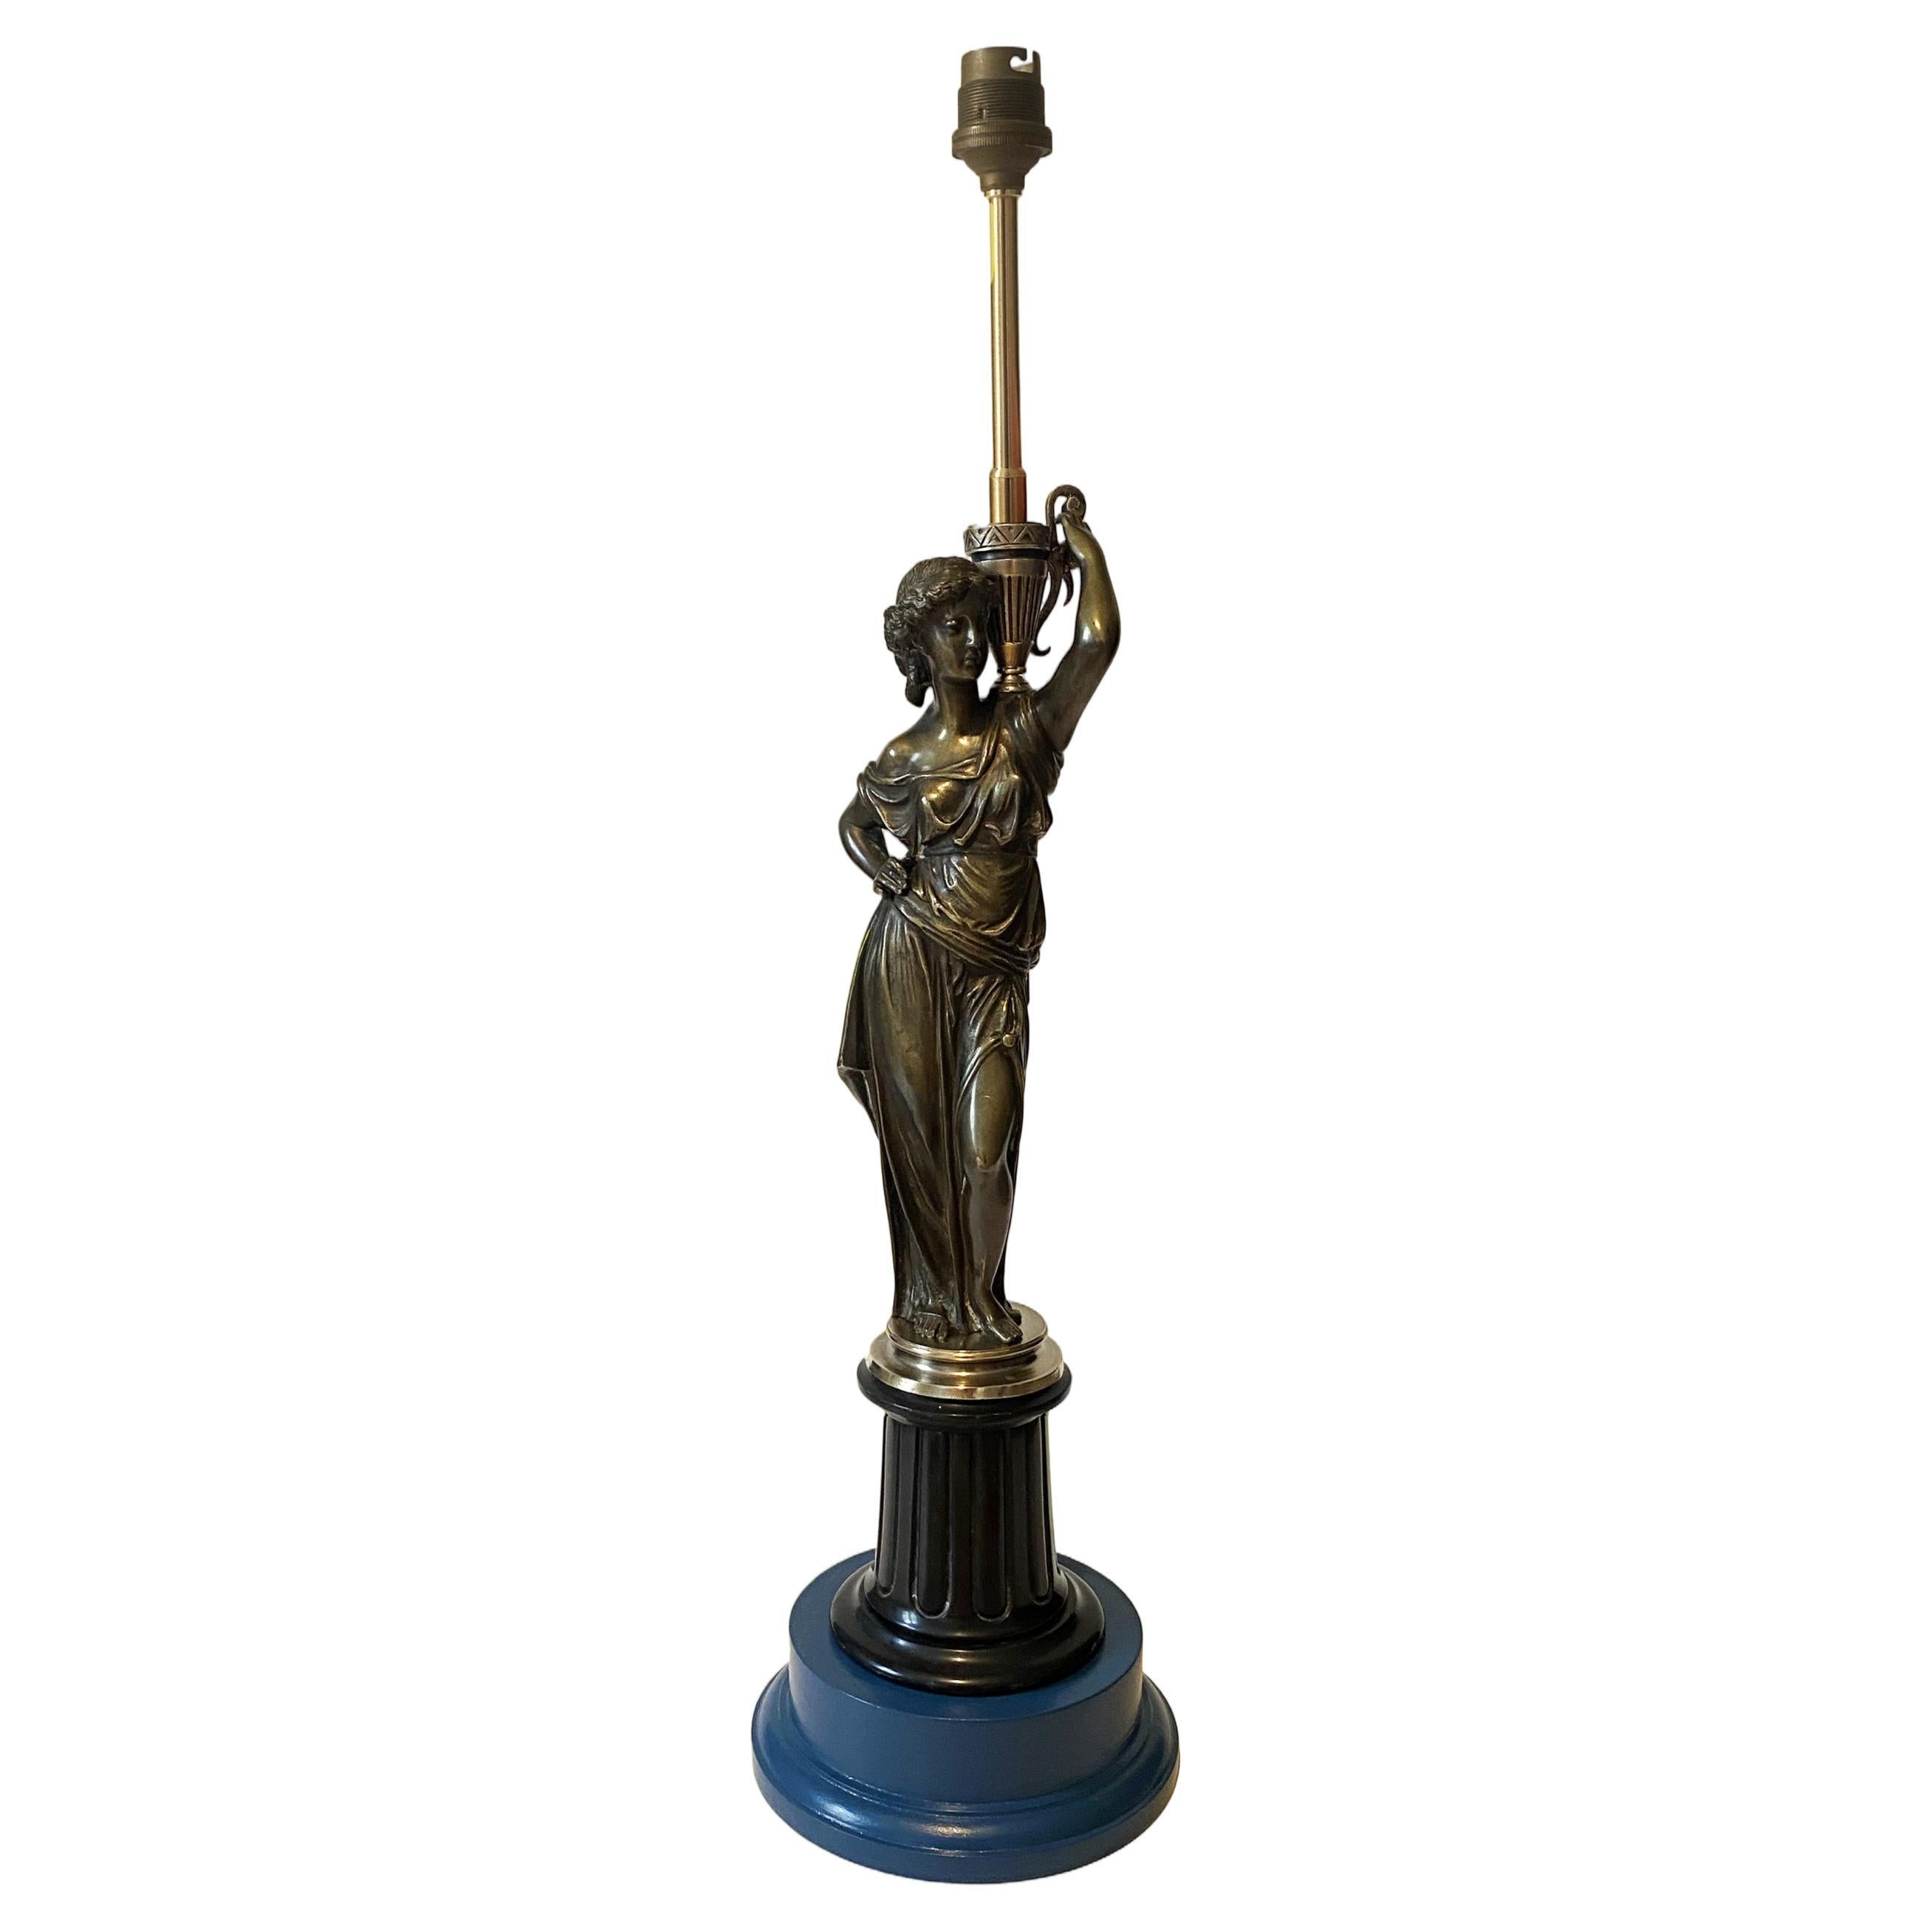 French Bronze Caryatid Flare Candelabra Lamp, Water carrier woman, XIX century.